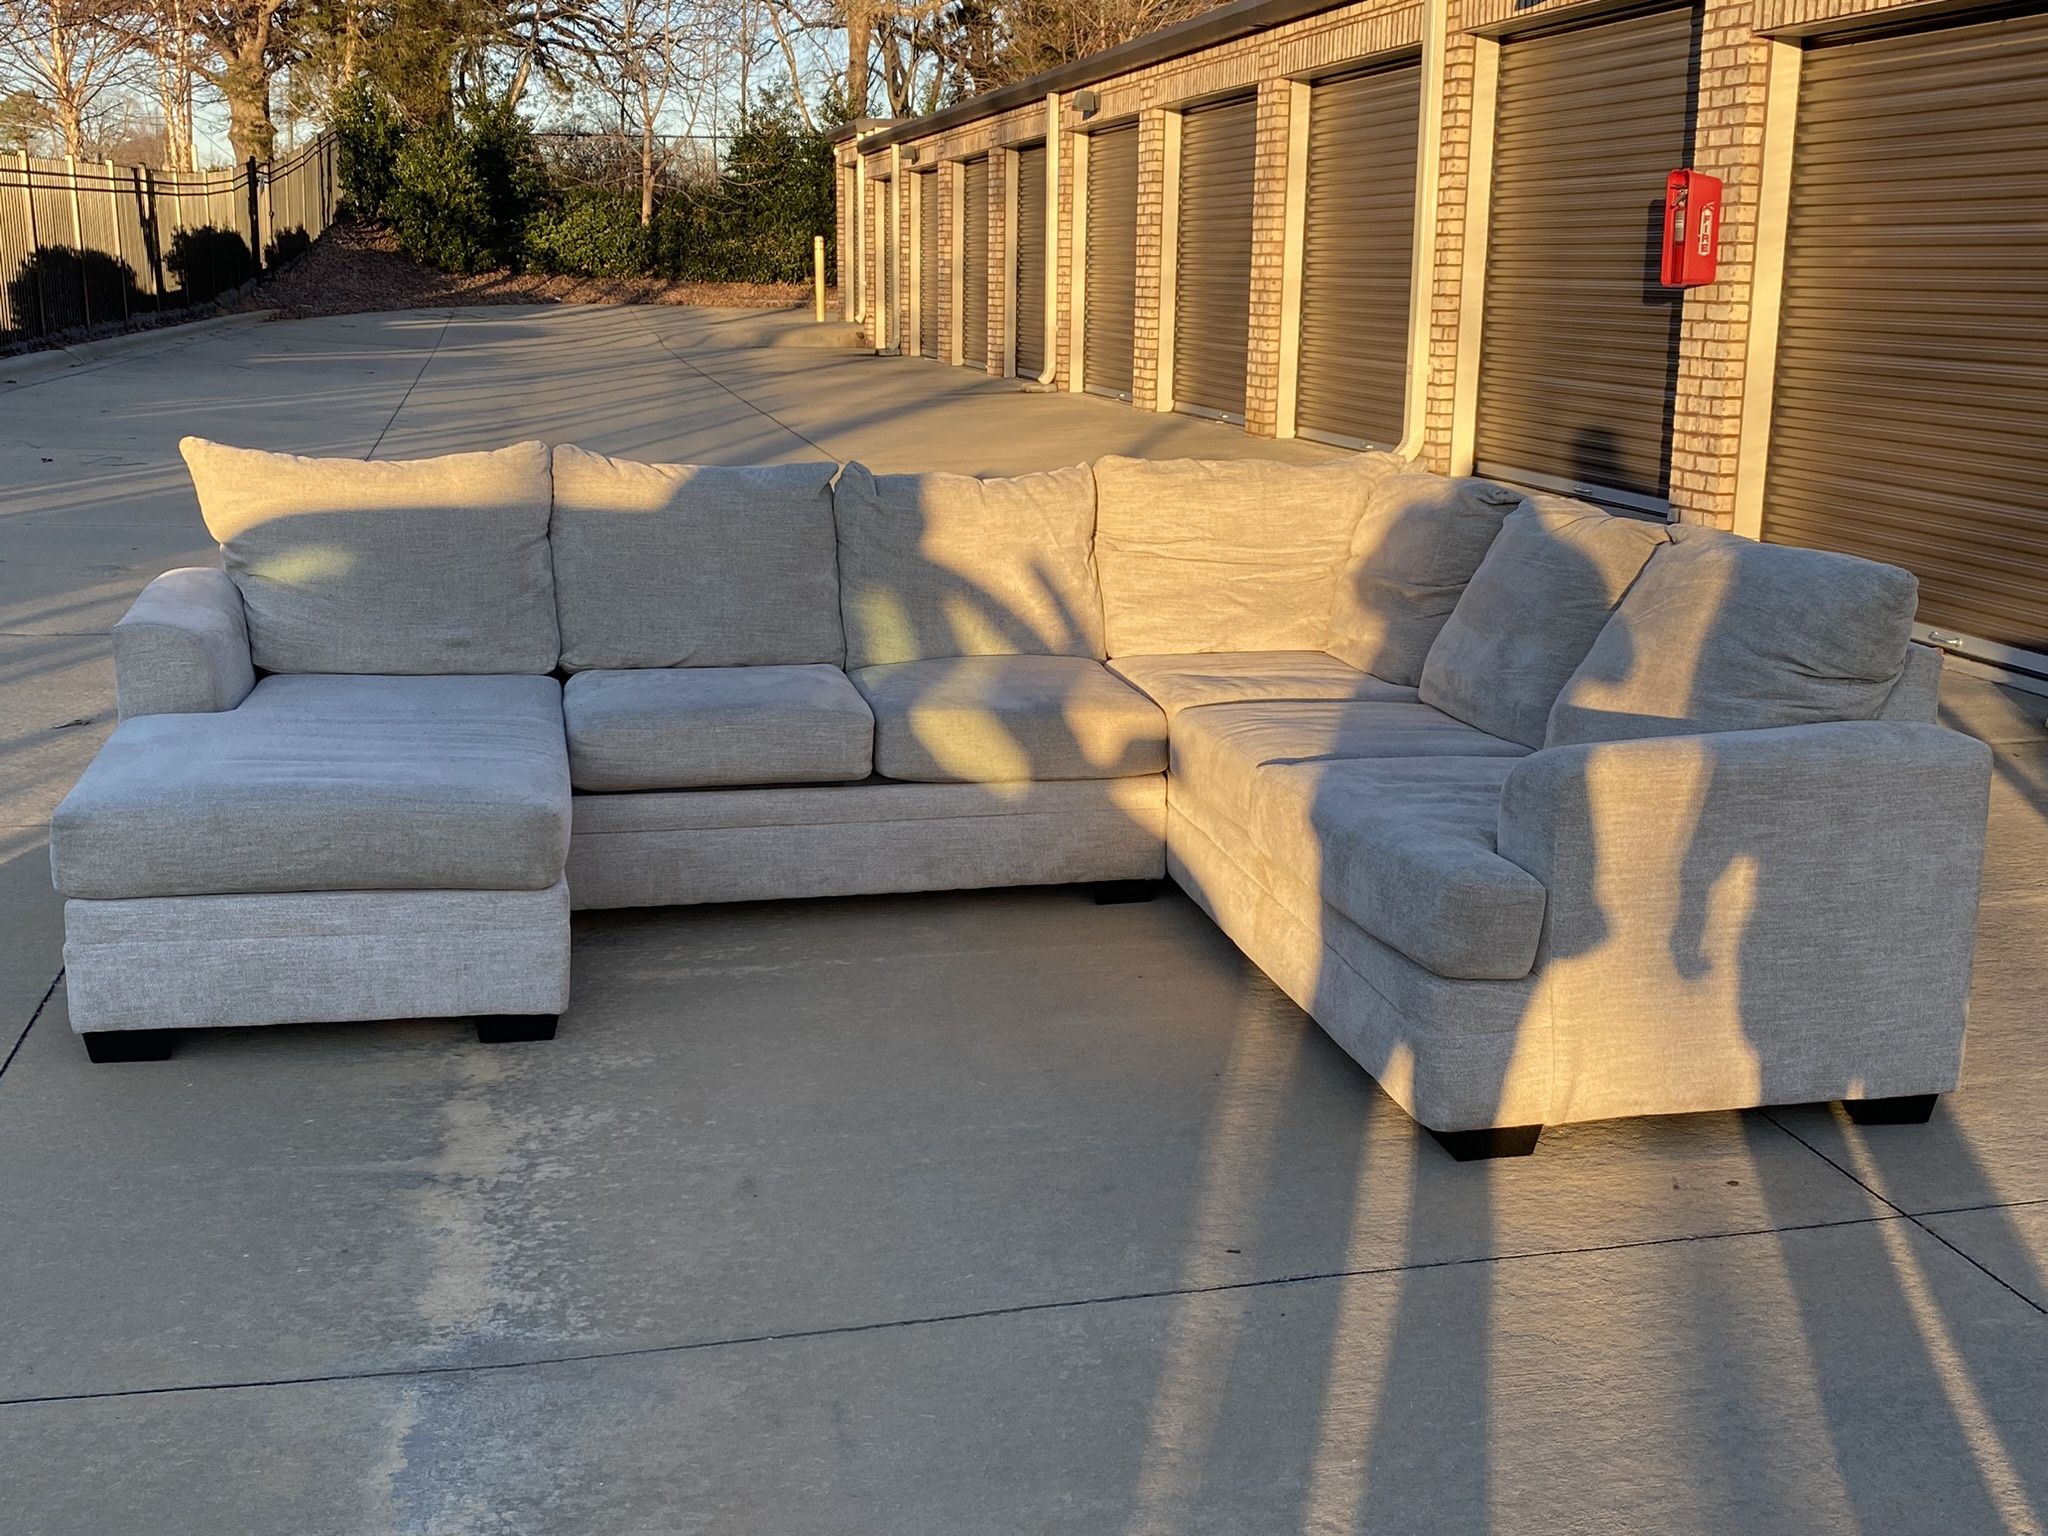 Copley court 2 Pc Left Arm Chaise Sectional